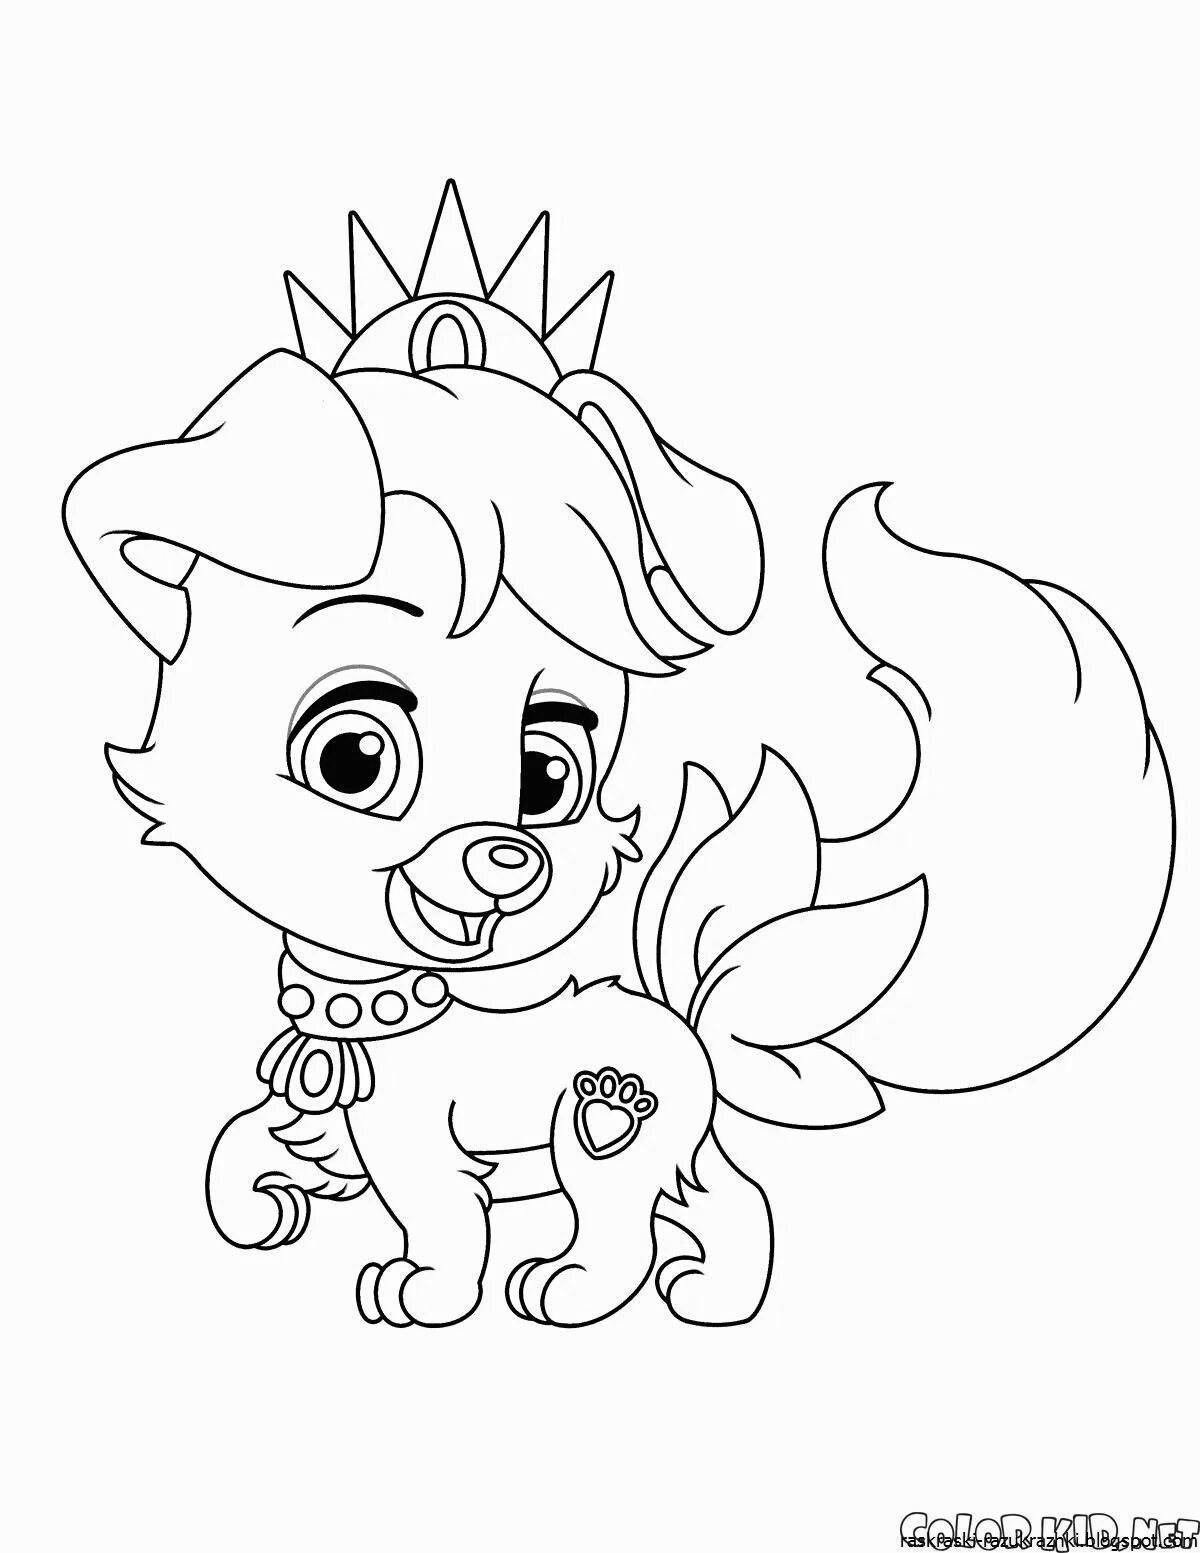 Adorable animal princess coloring pages for girls